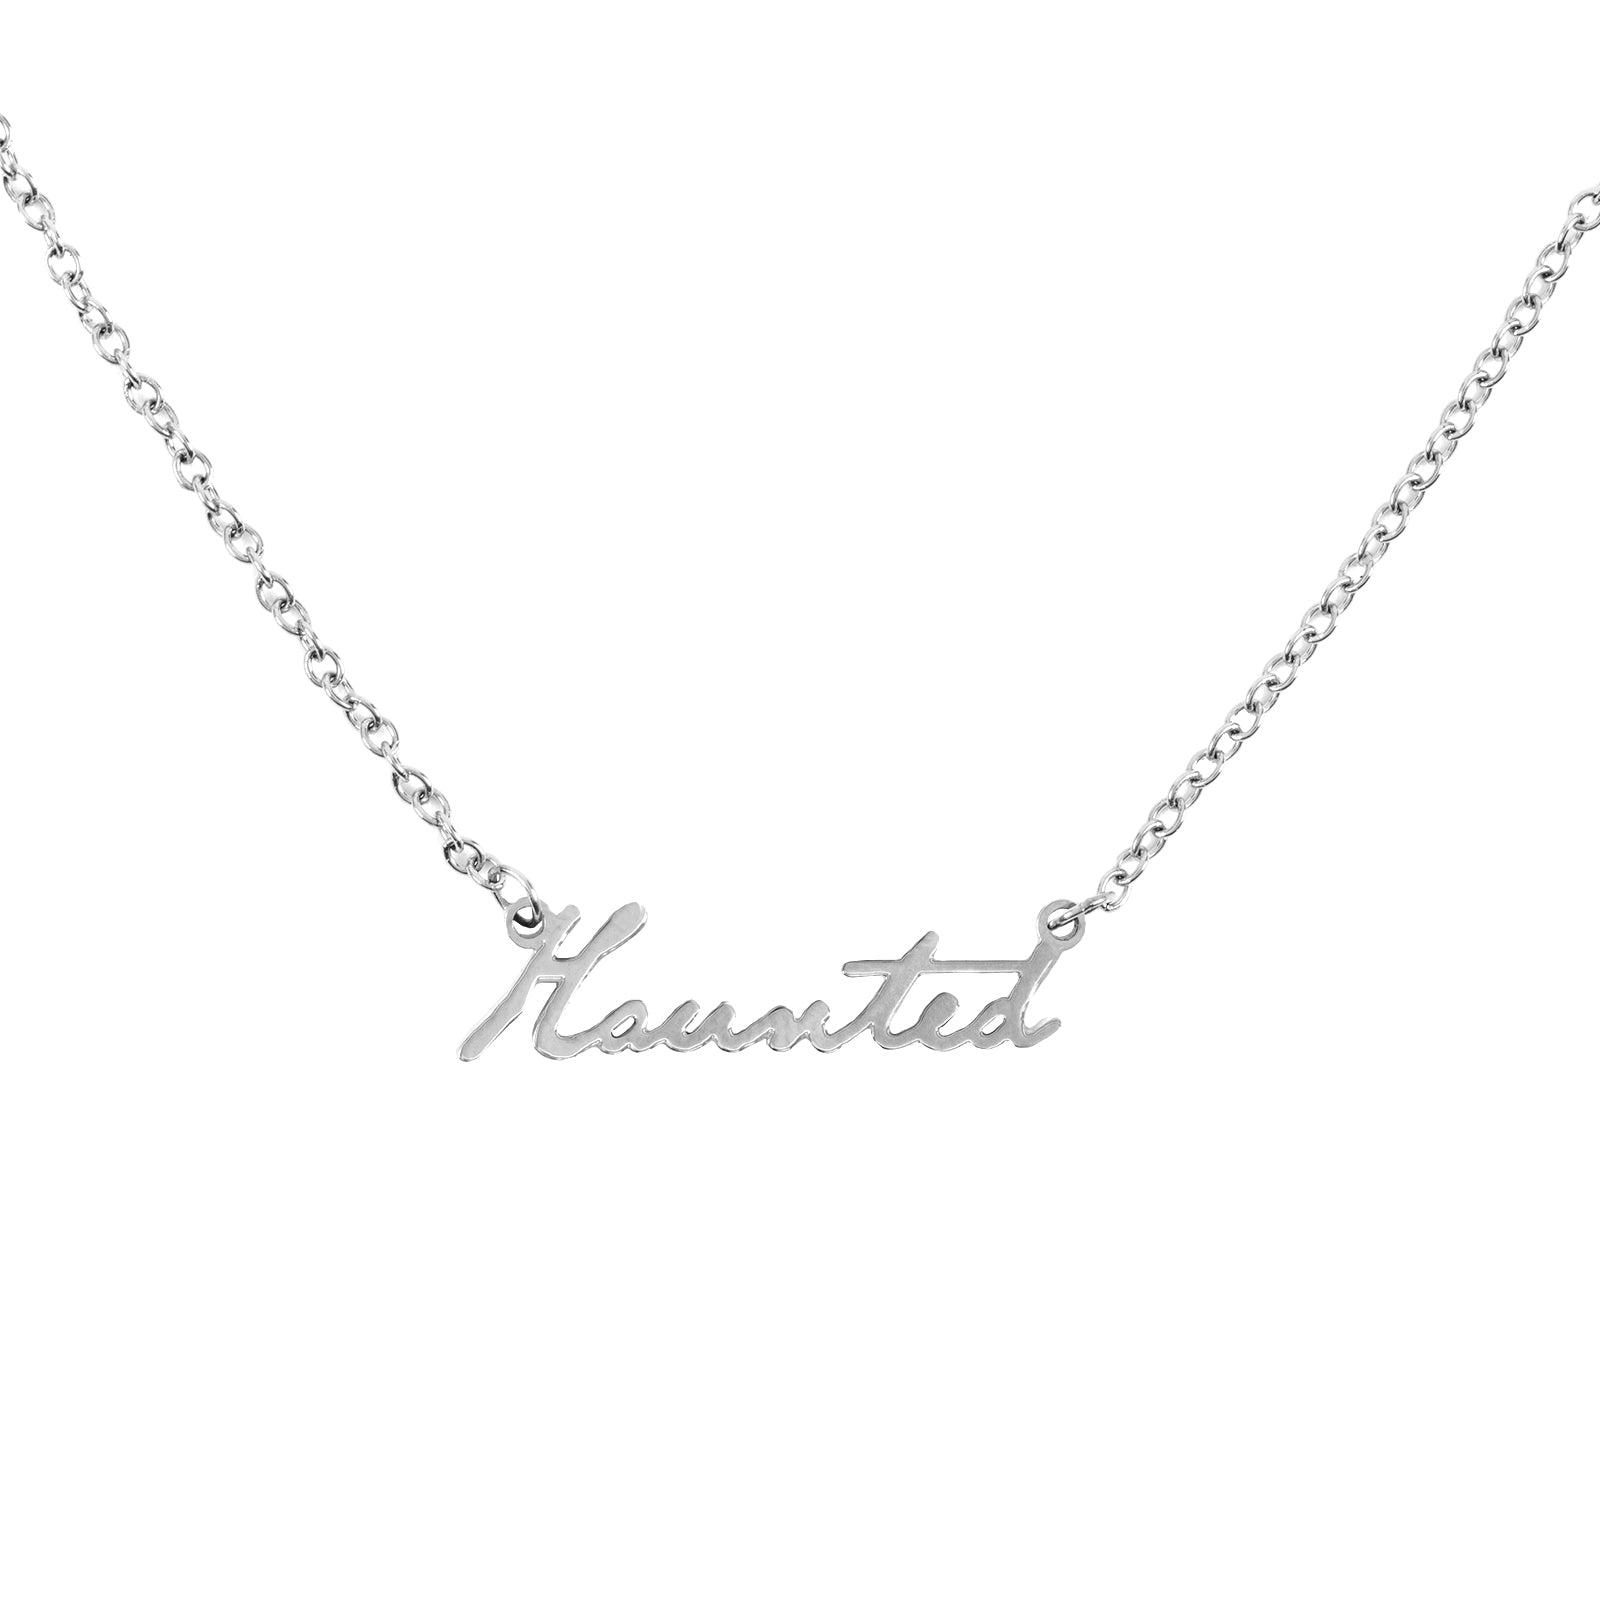 Haunted Sterling Silver Necklace